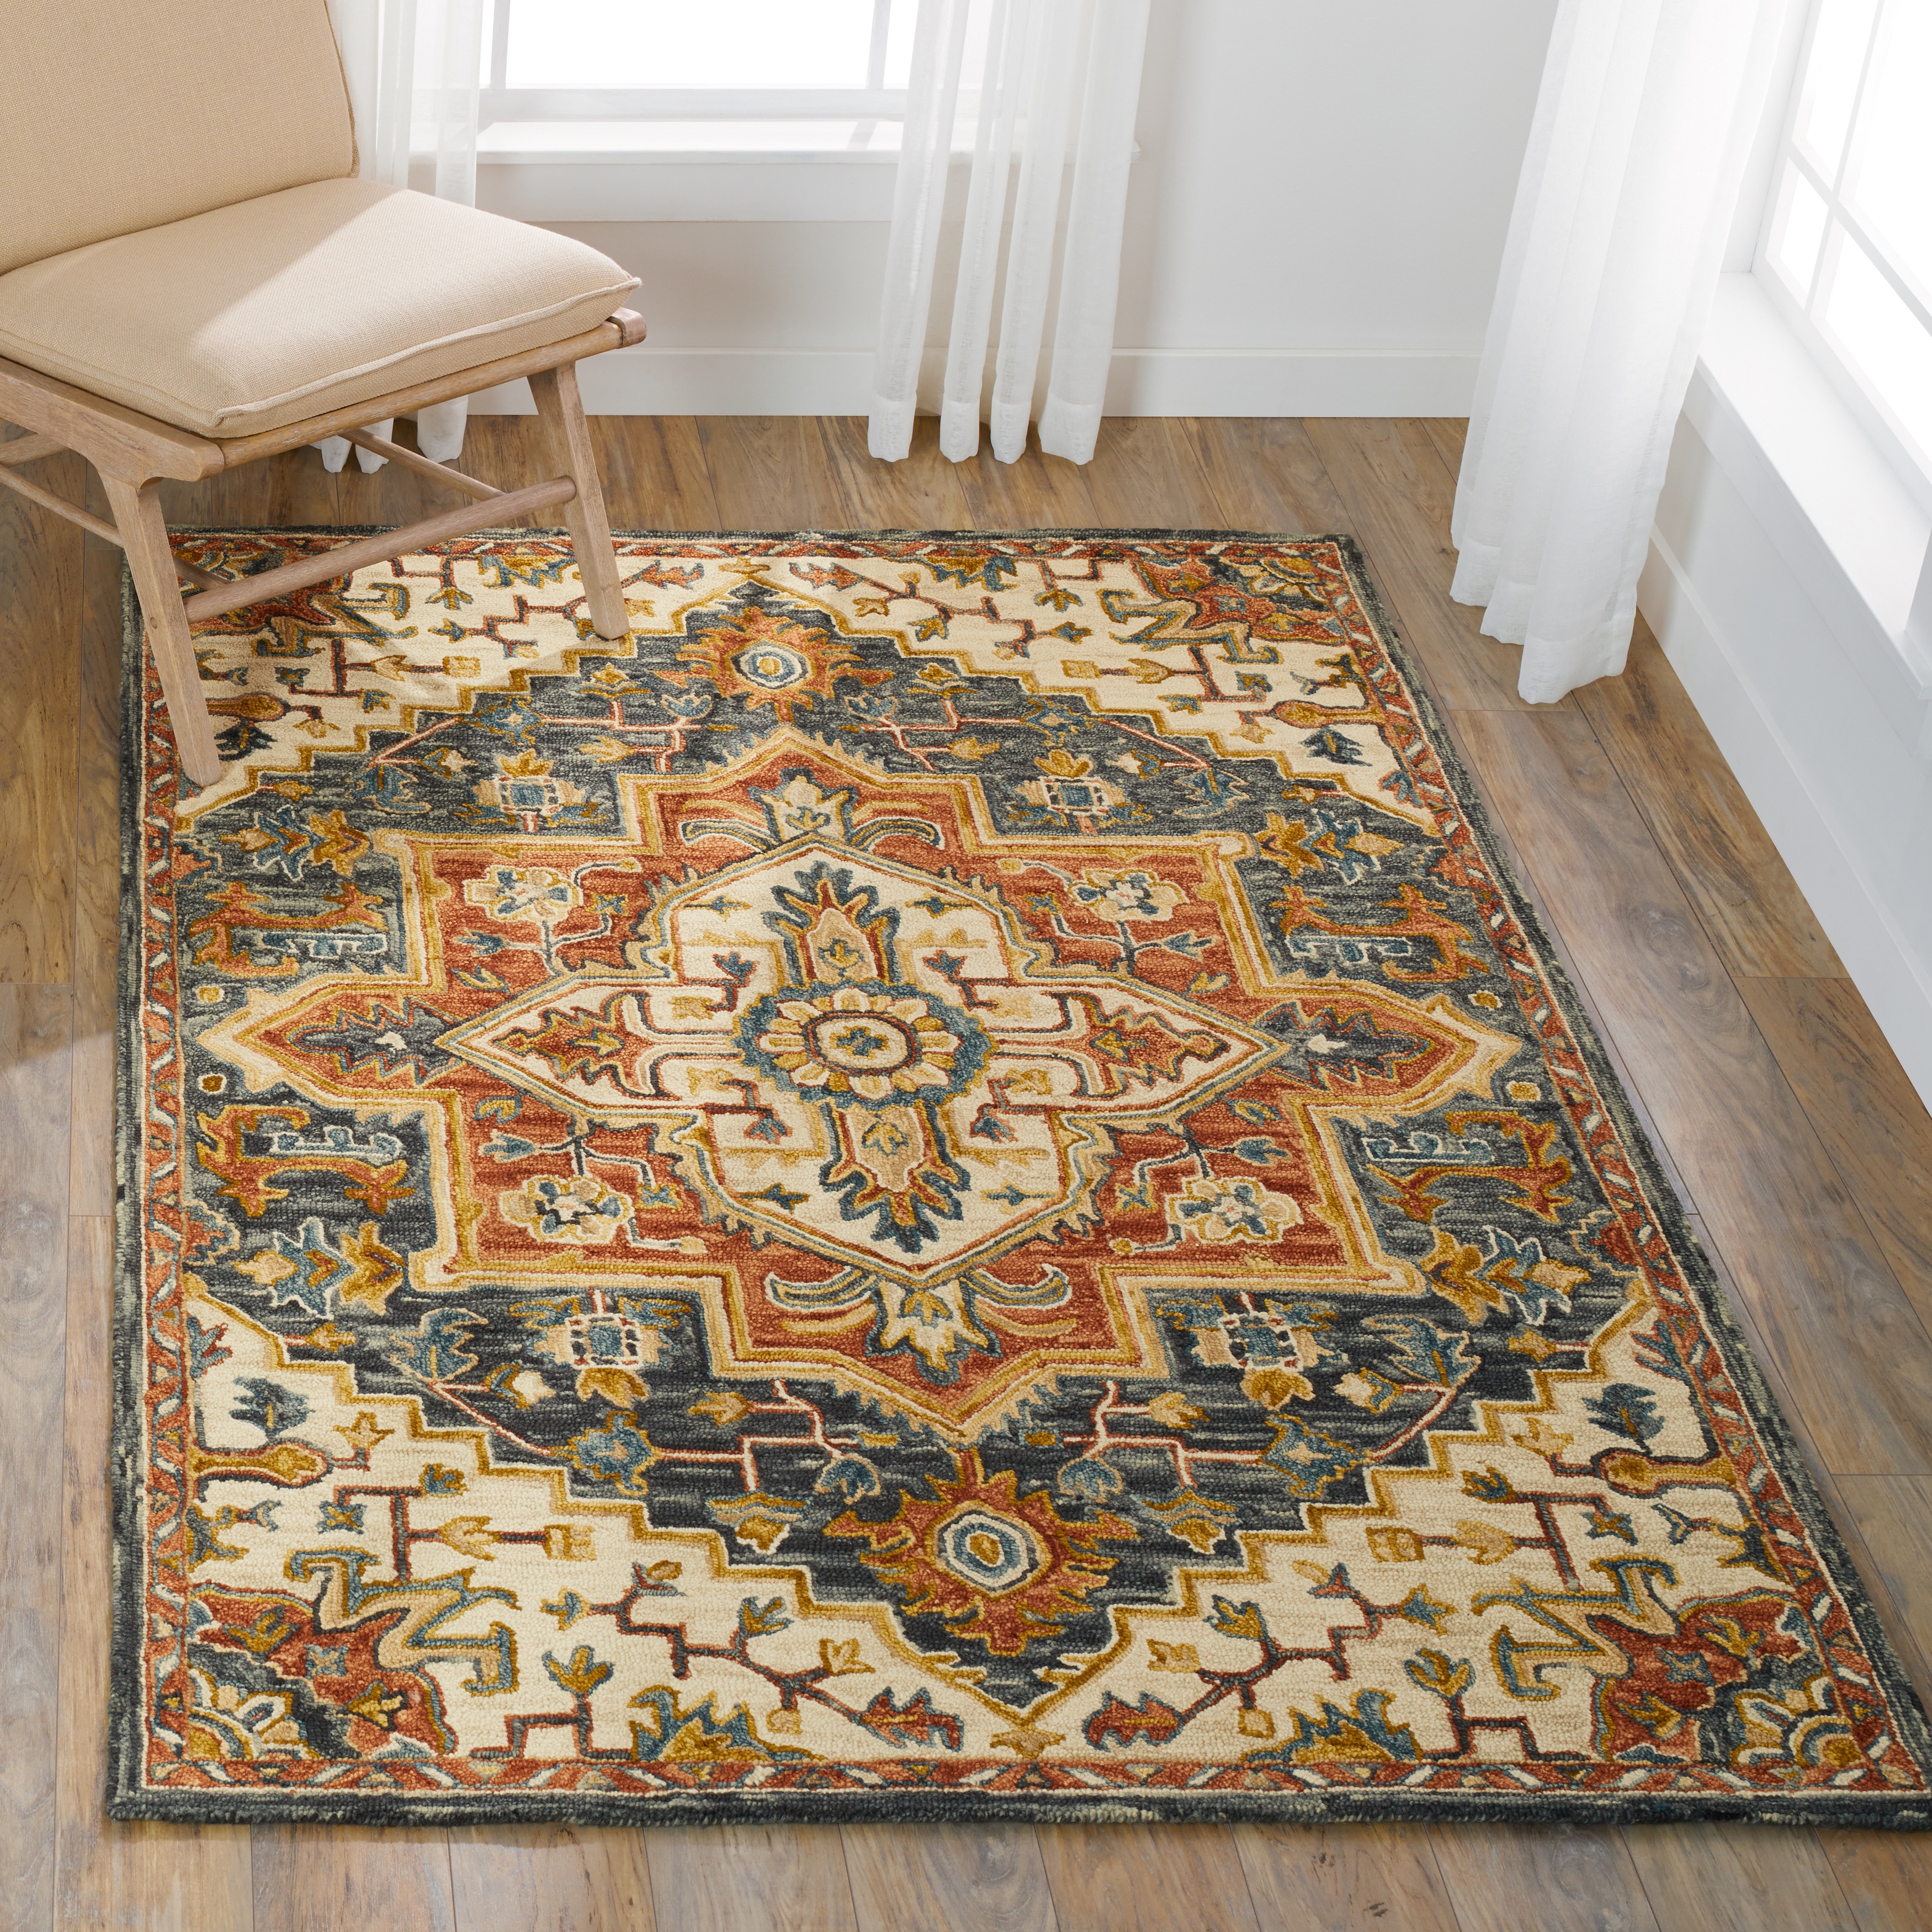 Hand-Hooked Alexander Home Rugs - Bed Bath & Beyond